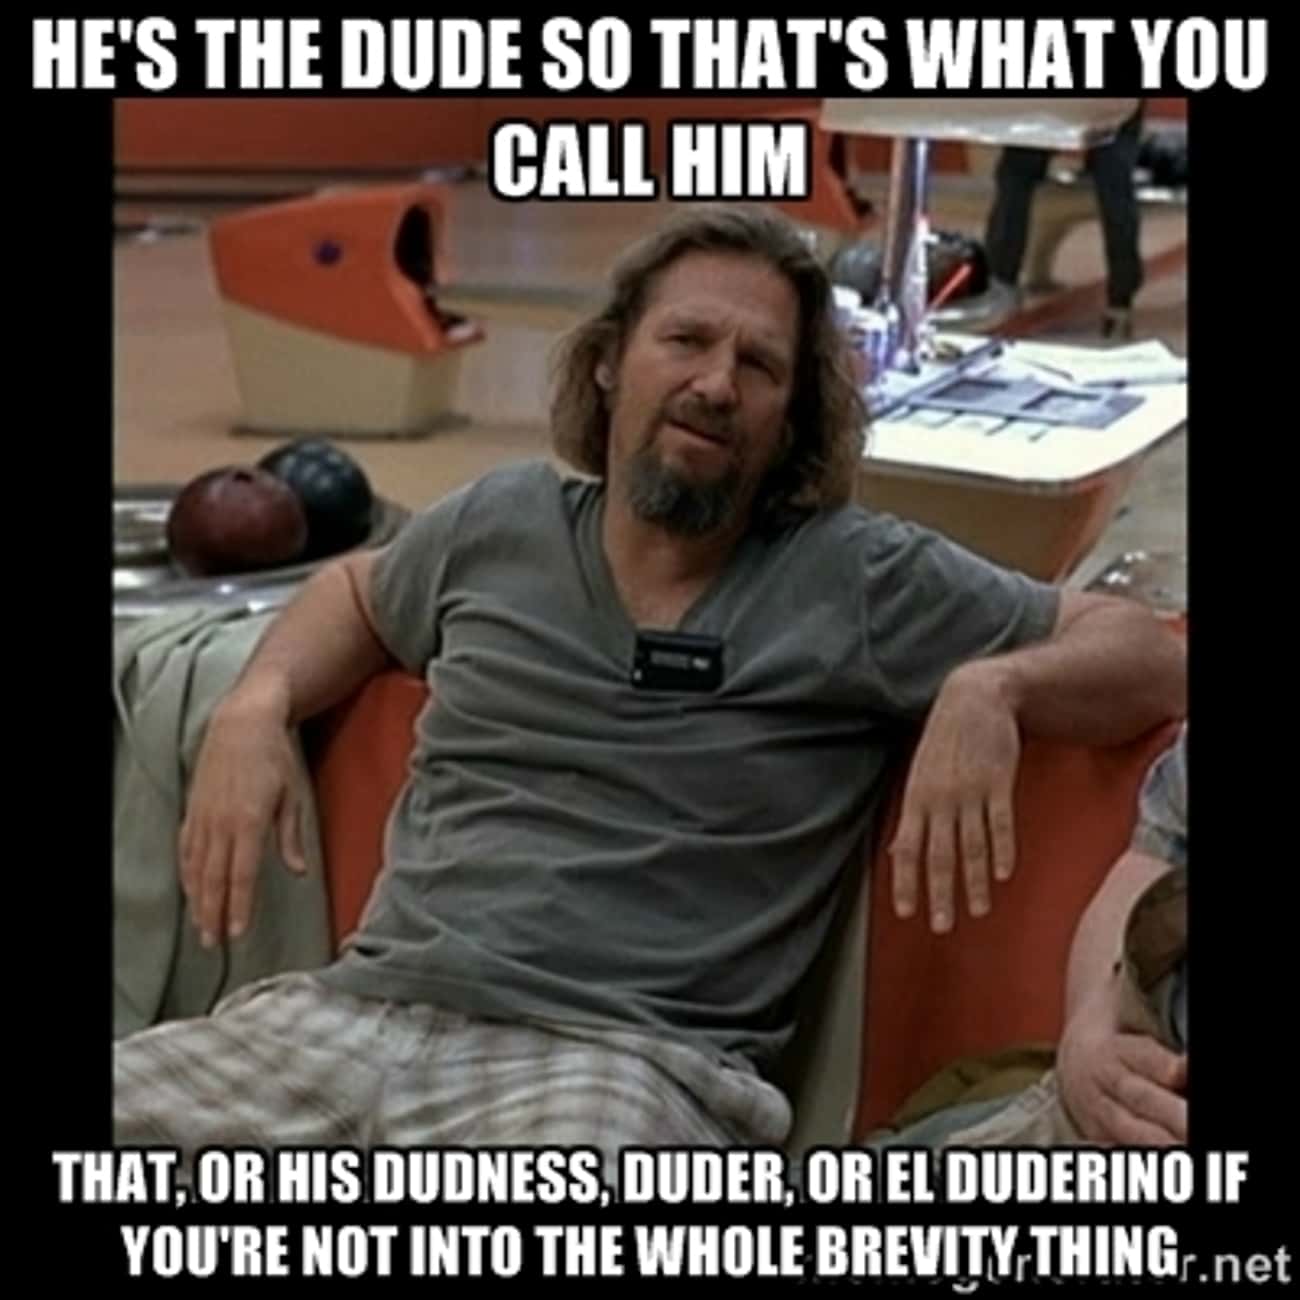 The Dude, on His Name